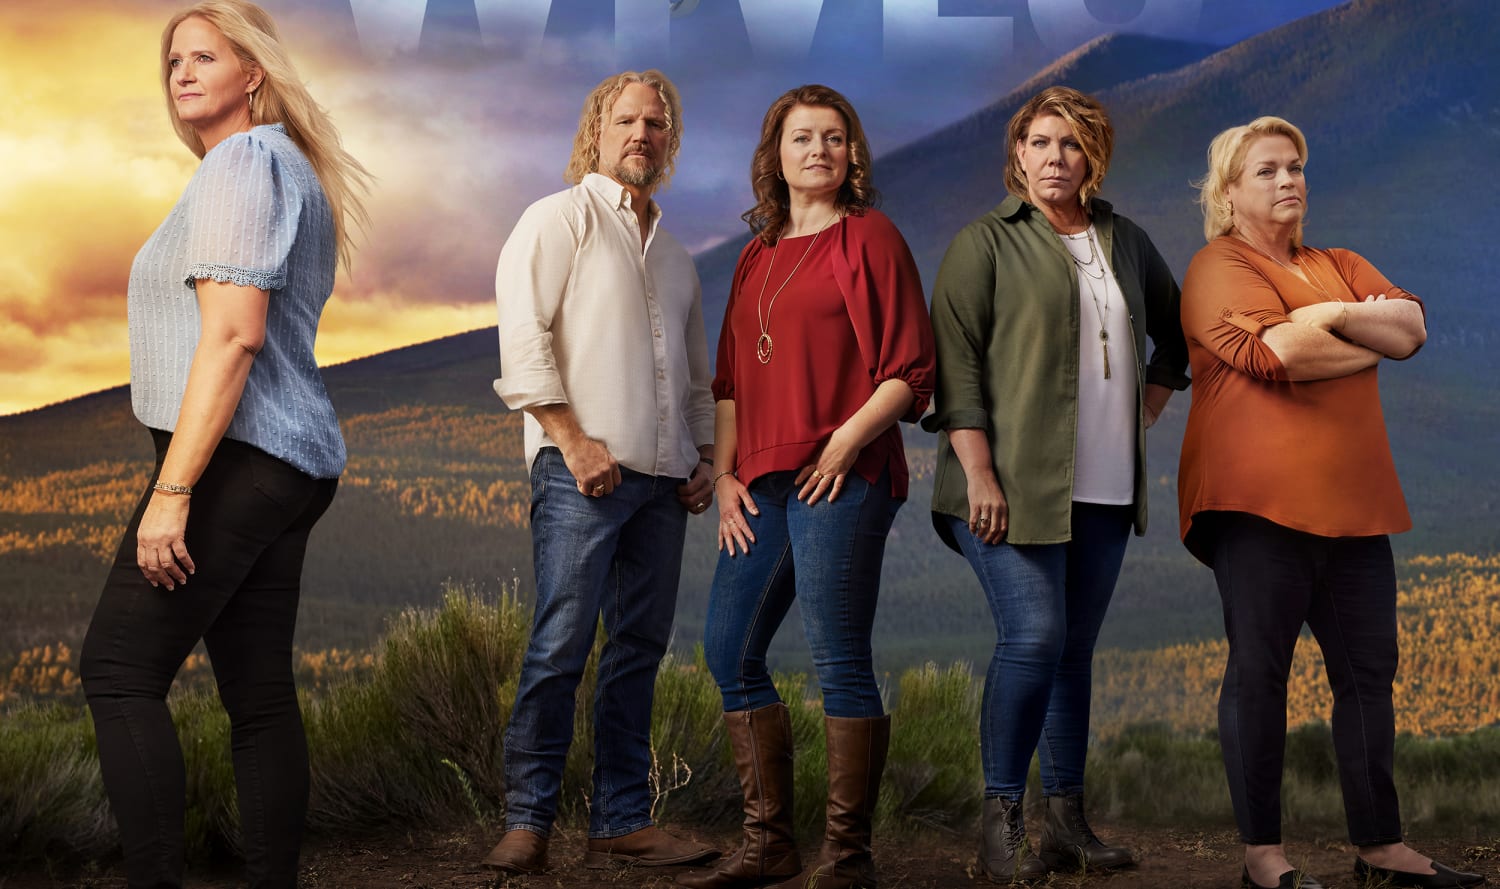 Sister Wives Is Kody Brown Still Married to Meri, Janelle, Christine and Robyn?